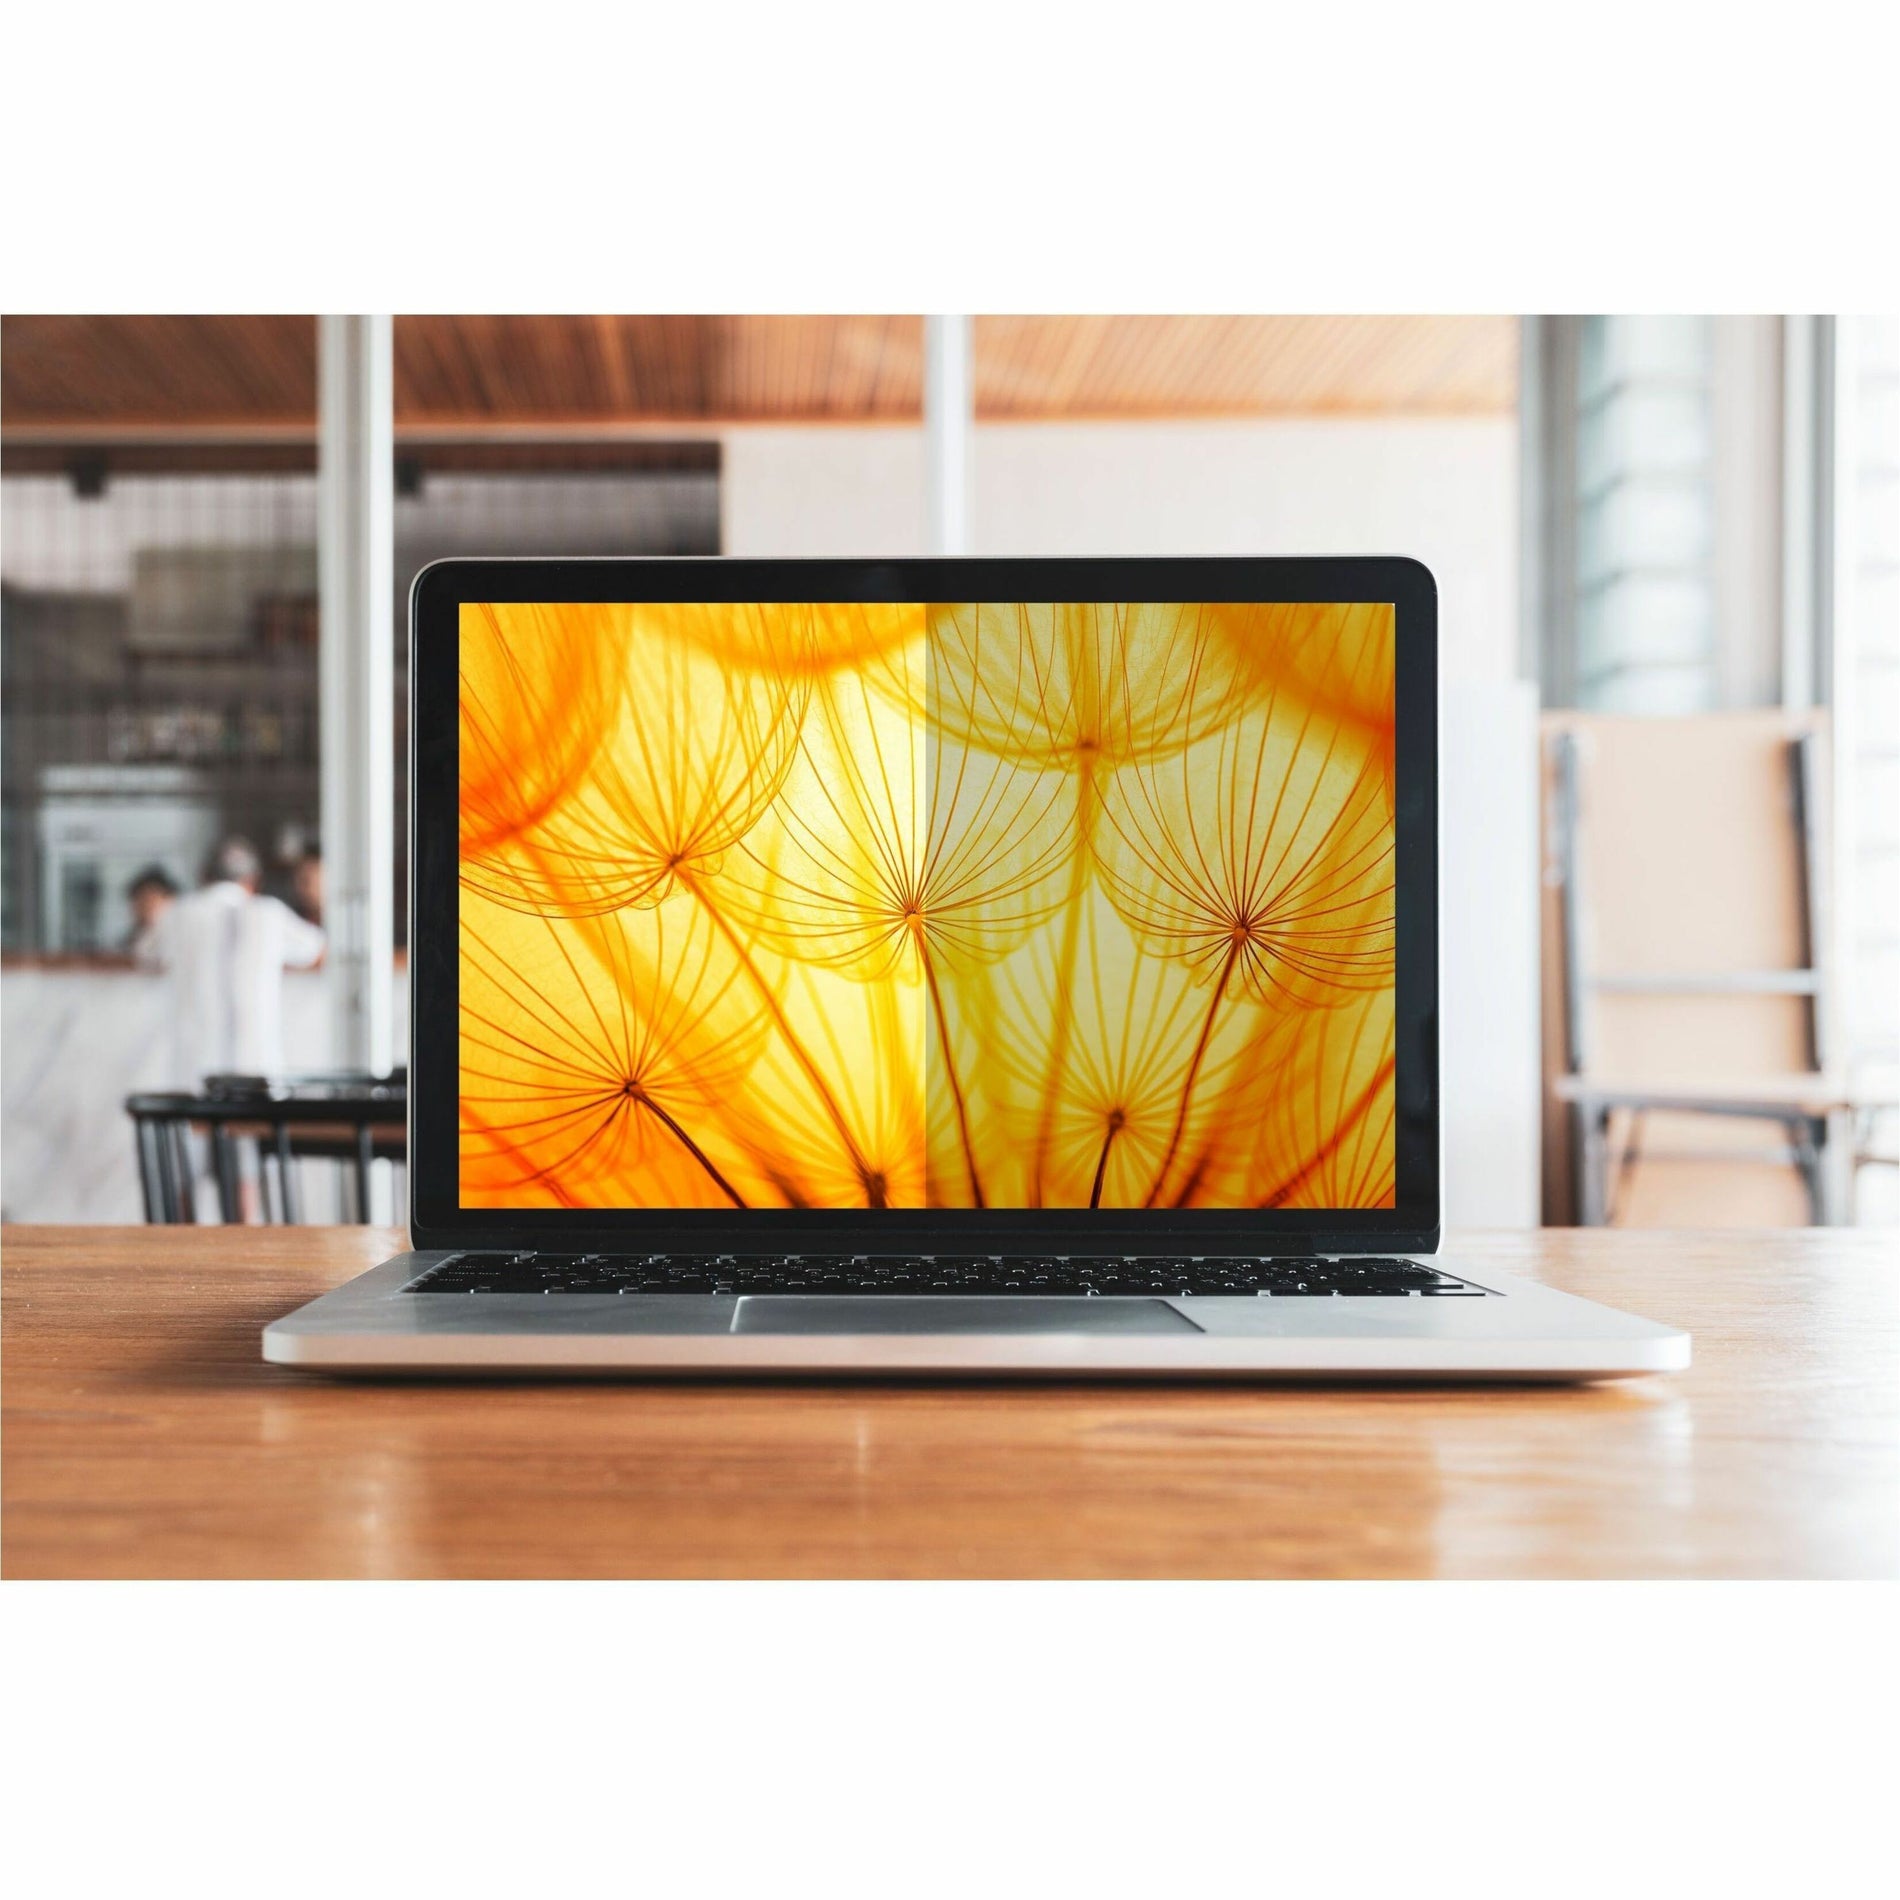 3M BP133W1B Bright Screen Privacy Filter for 13.3in Laptop, 16:10, Ultra Slim, Blue Light Reduction